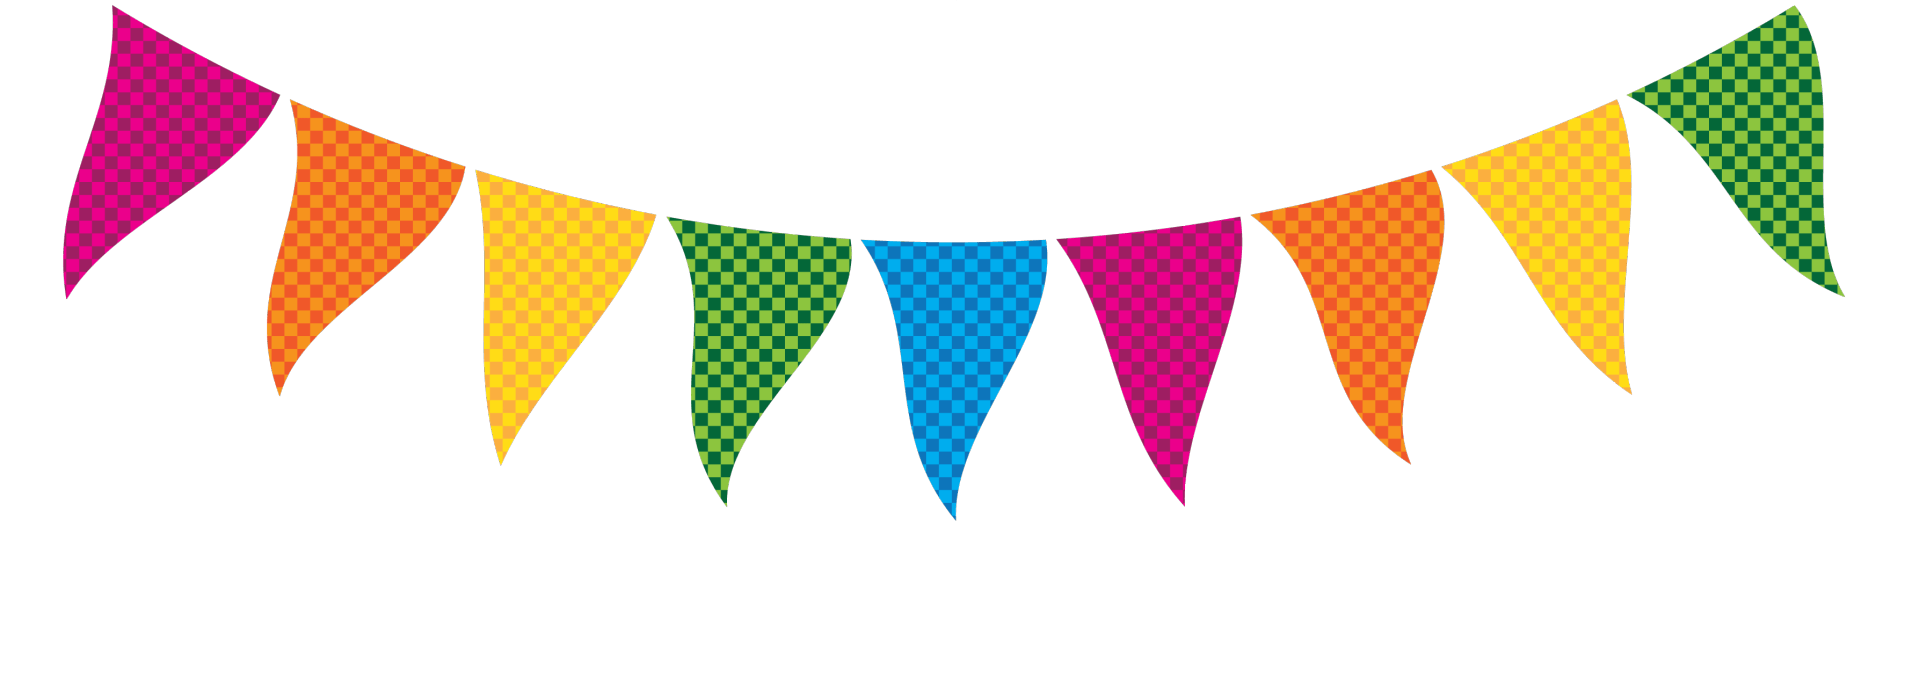 Party decorations clipart png